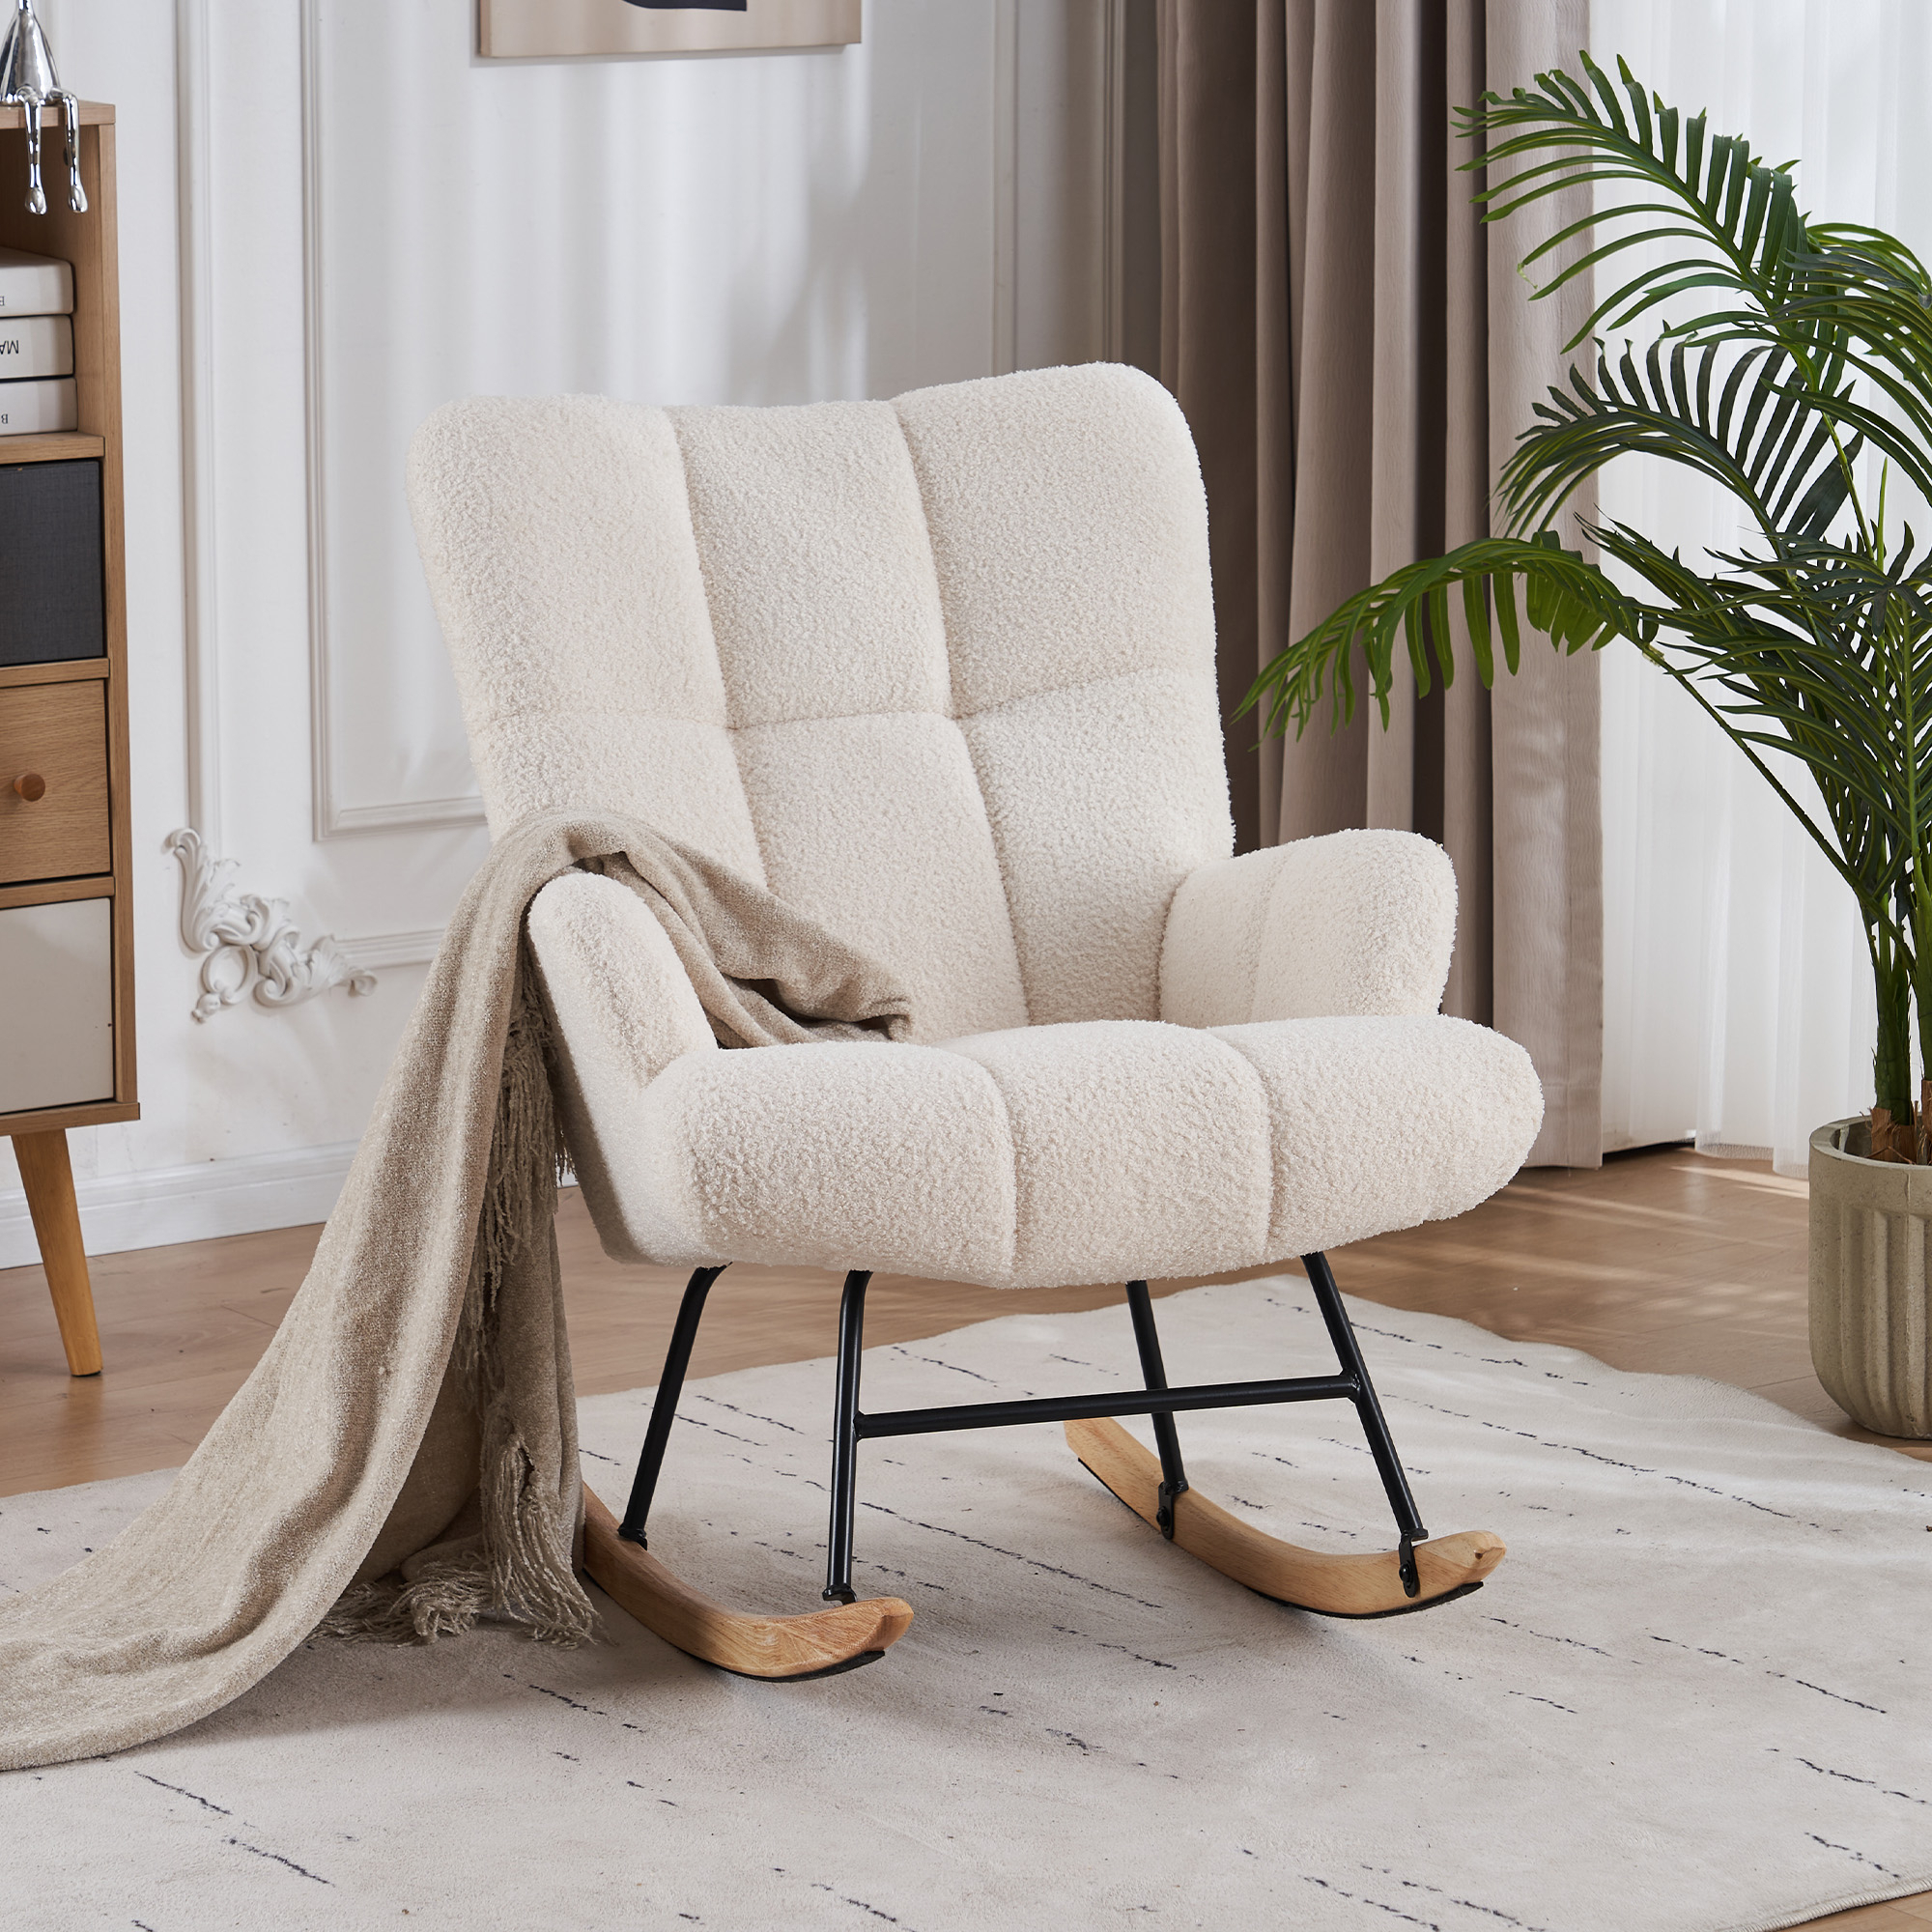 Teddy Velvet Rocking Accent Chair, Uplostered Glider Rocker Armchair For Nursery, Comfy Wingback Armchair - White